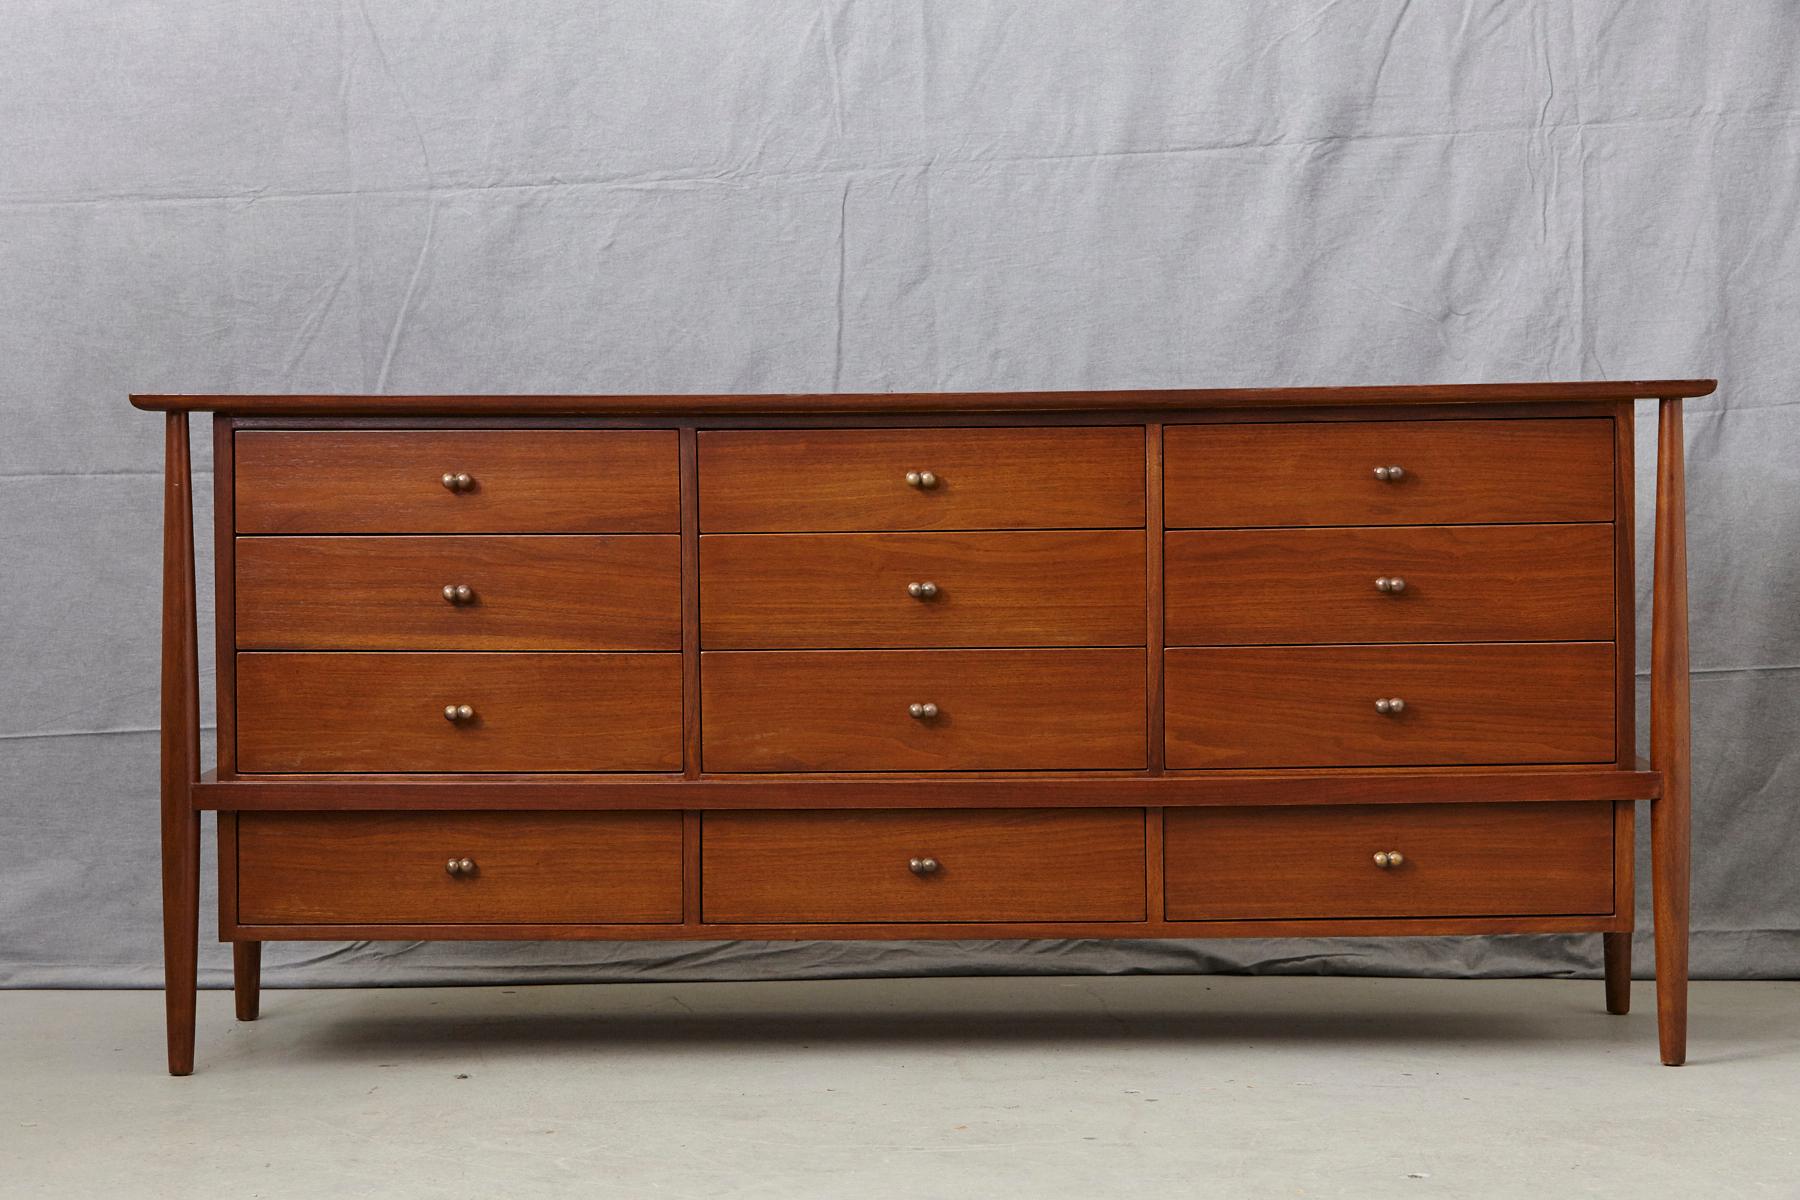 John Stuart 12 drawers walnut dresser with original solid brass pulls mounted on tapered legs, 1960s.
The 6 ft. long credenza has a very elegant and light appearance because of the sculptured looking legs.
The credenza is in very good condition,